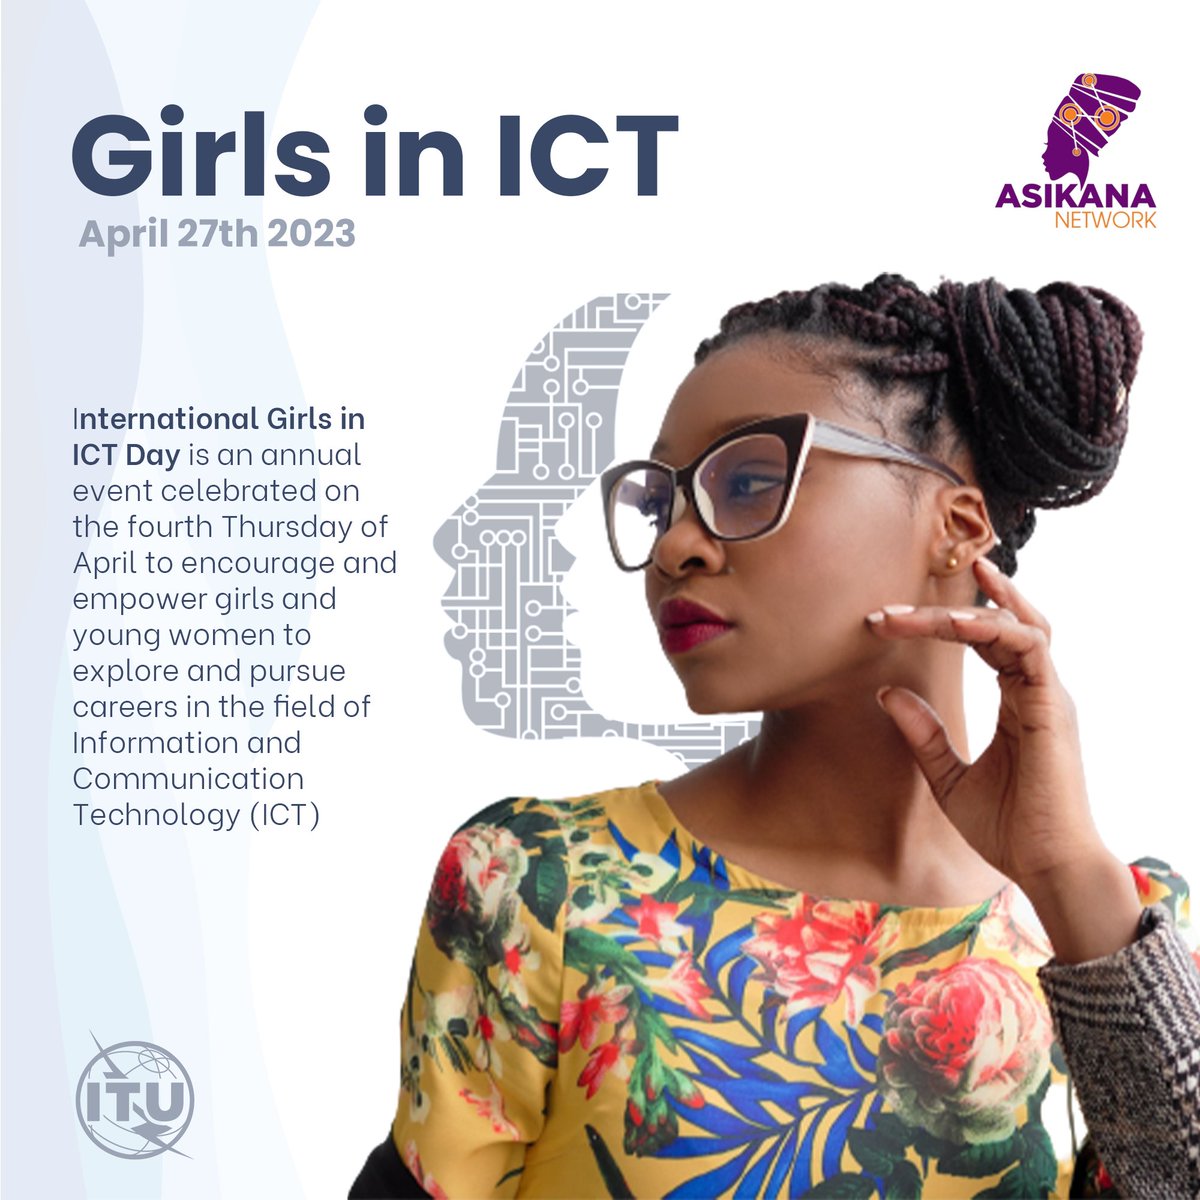 Happy International girls in ICT day! This year's theme is 'Digital Skills for Life' In our effort to contribute to this theme, Asikana Network has been actively working on various projects to help women gain skills for life.